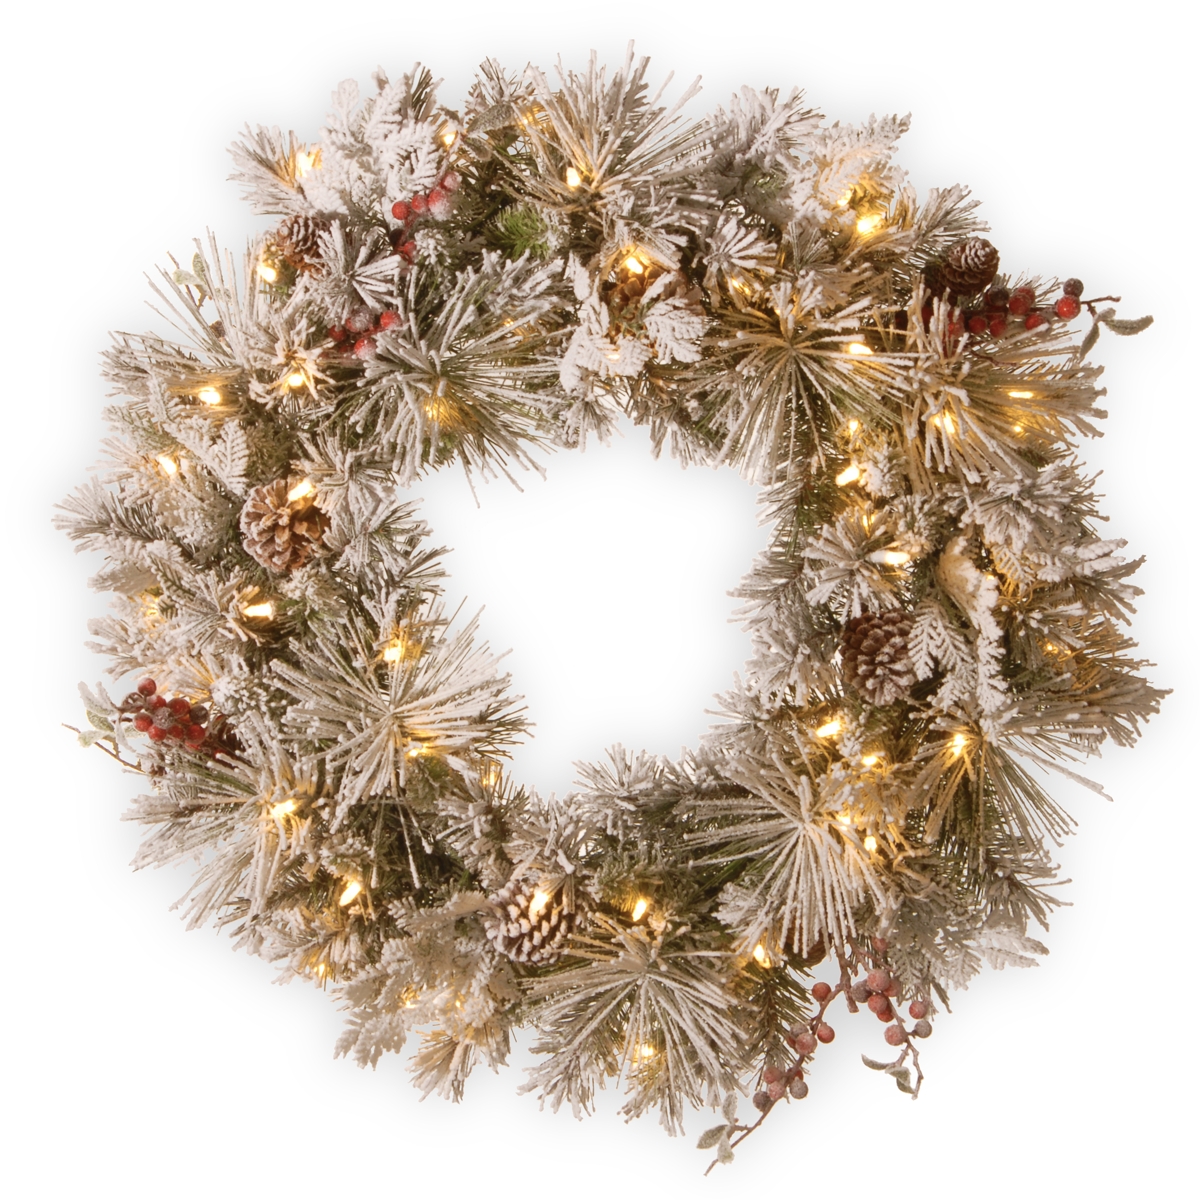 30" Snowy Bedford Pine Wreath with Cedar Leaves, Red Berries, Mixed Cones & 70 Warm White Battery Operated Led Lights w/Timer -